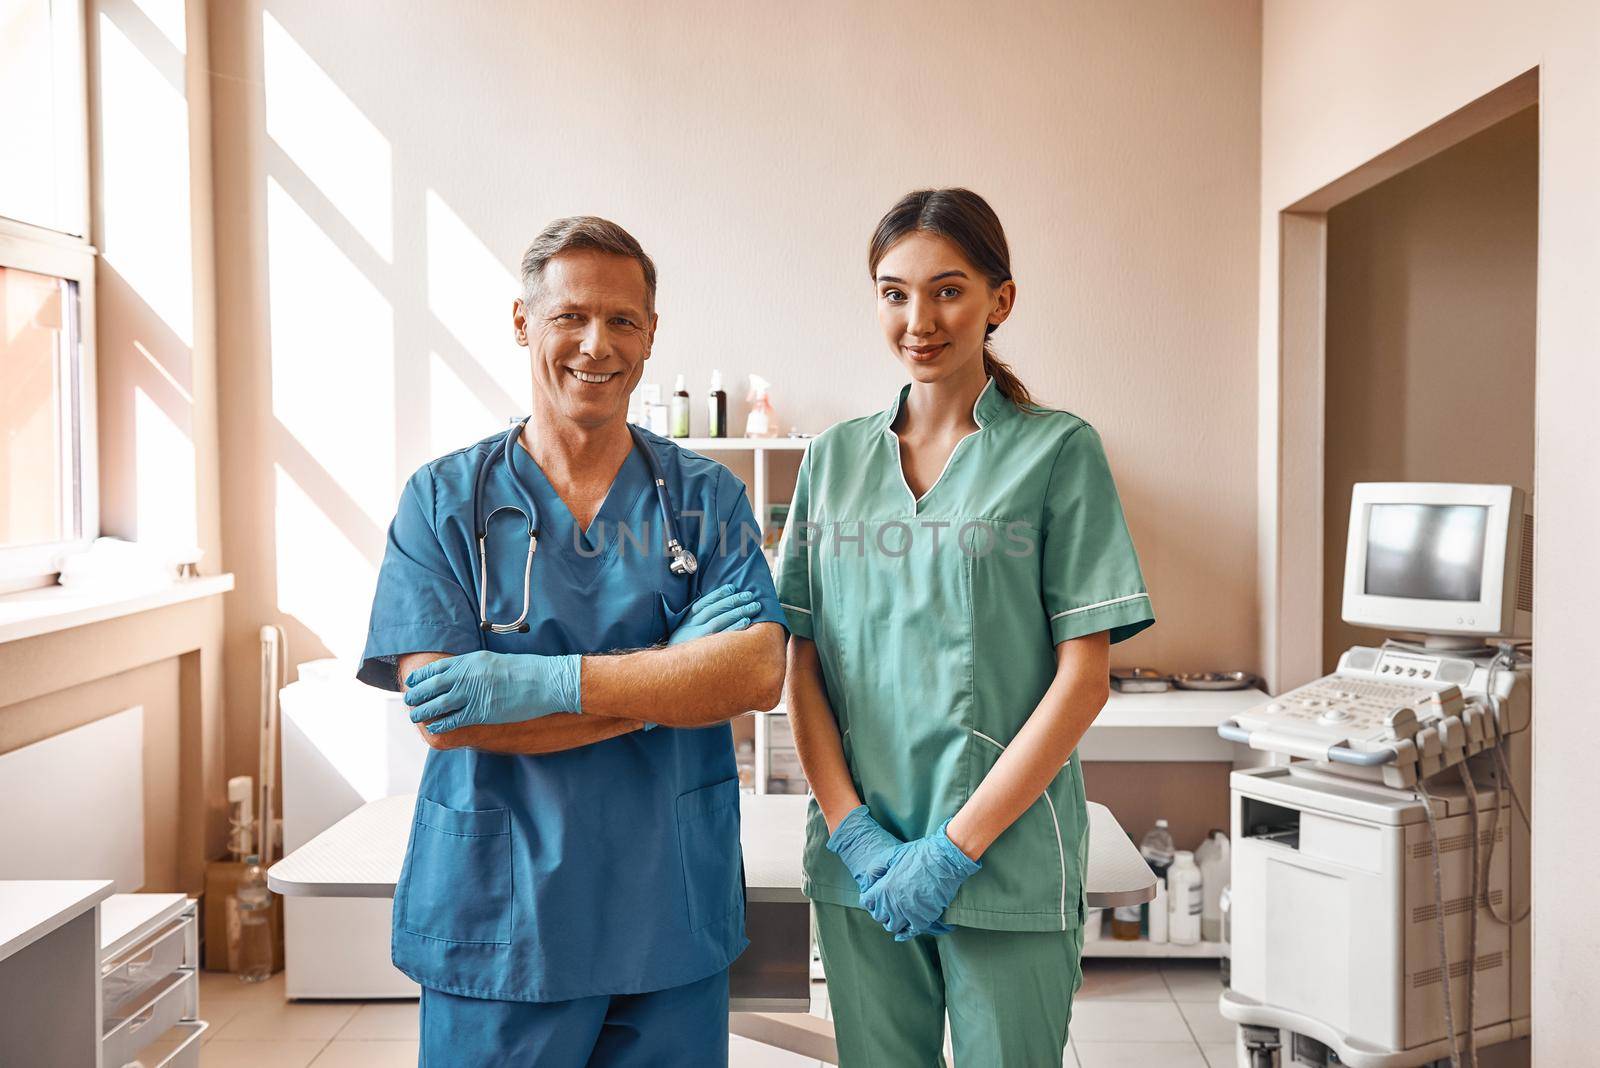 Professional team. Two positive vets in work uniform are smiling and looking at camera while standing at the veterinary clinic. Pet care concept. Medicine concept. Animal hospital